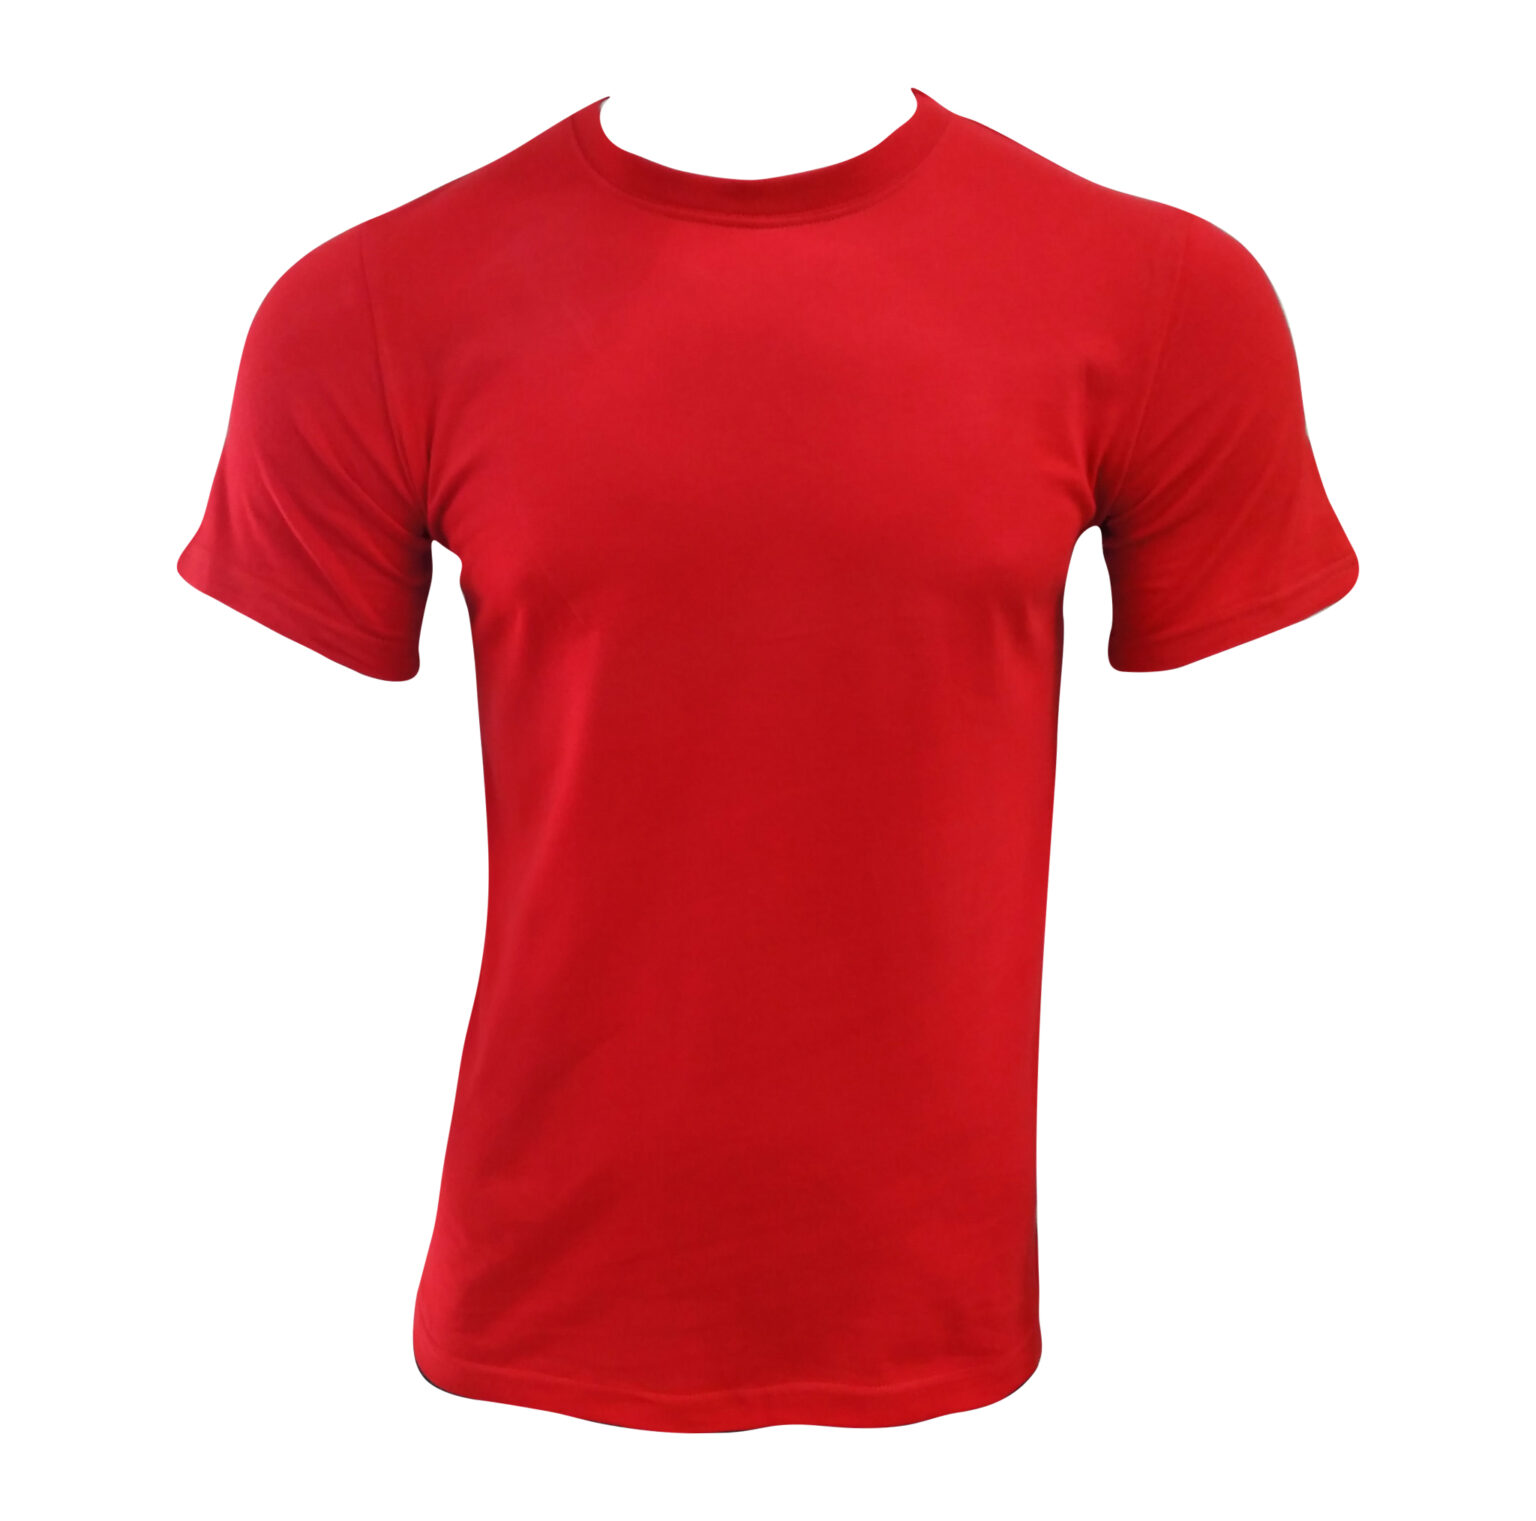 Round Neck Cotton T-Shirts - Miguel Moses